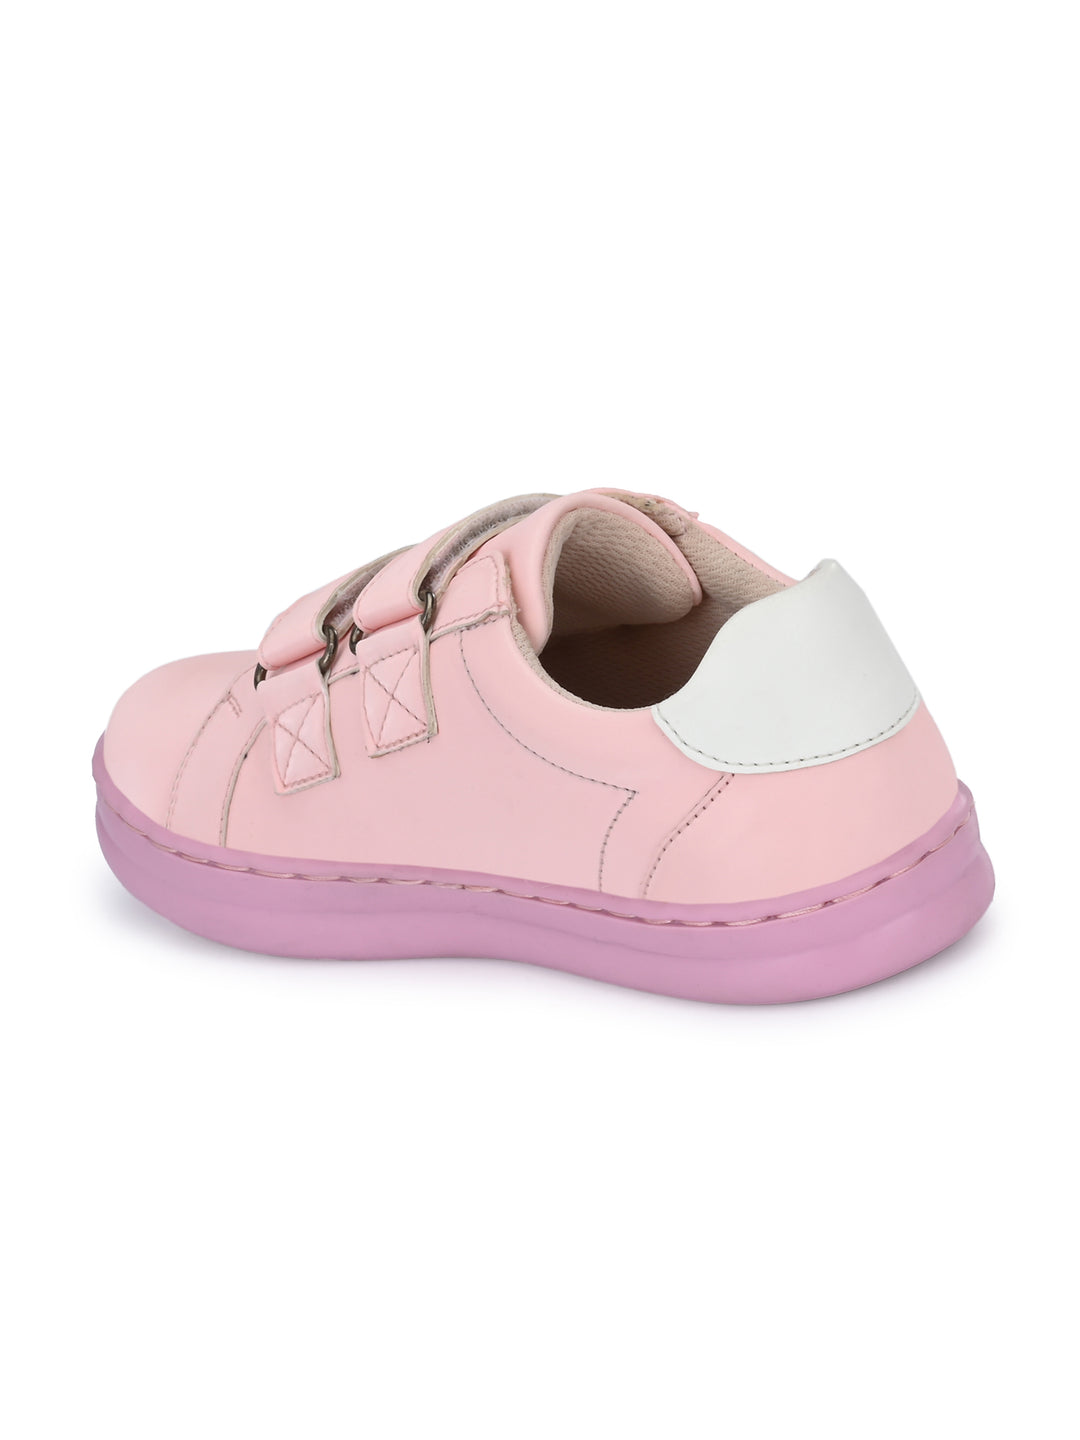 Chloe Pink Dual Size Technology Sneakers for Kids